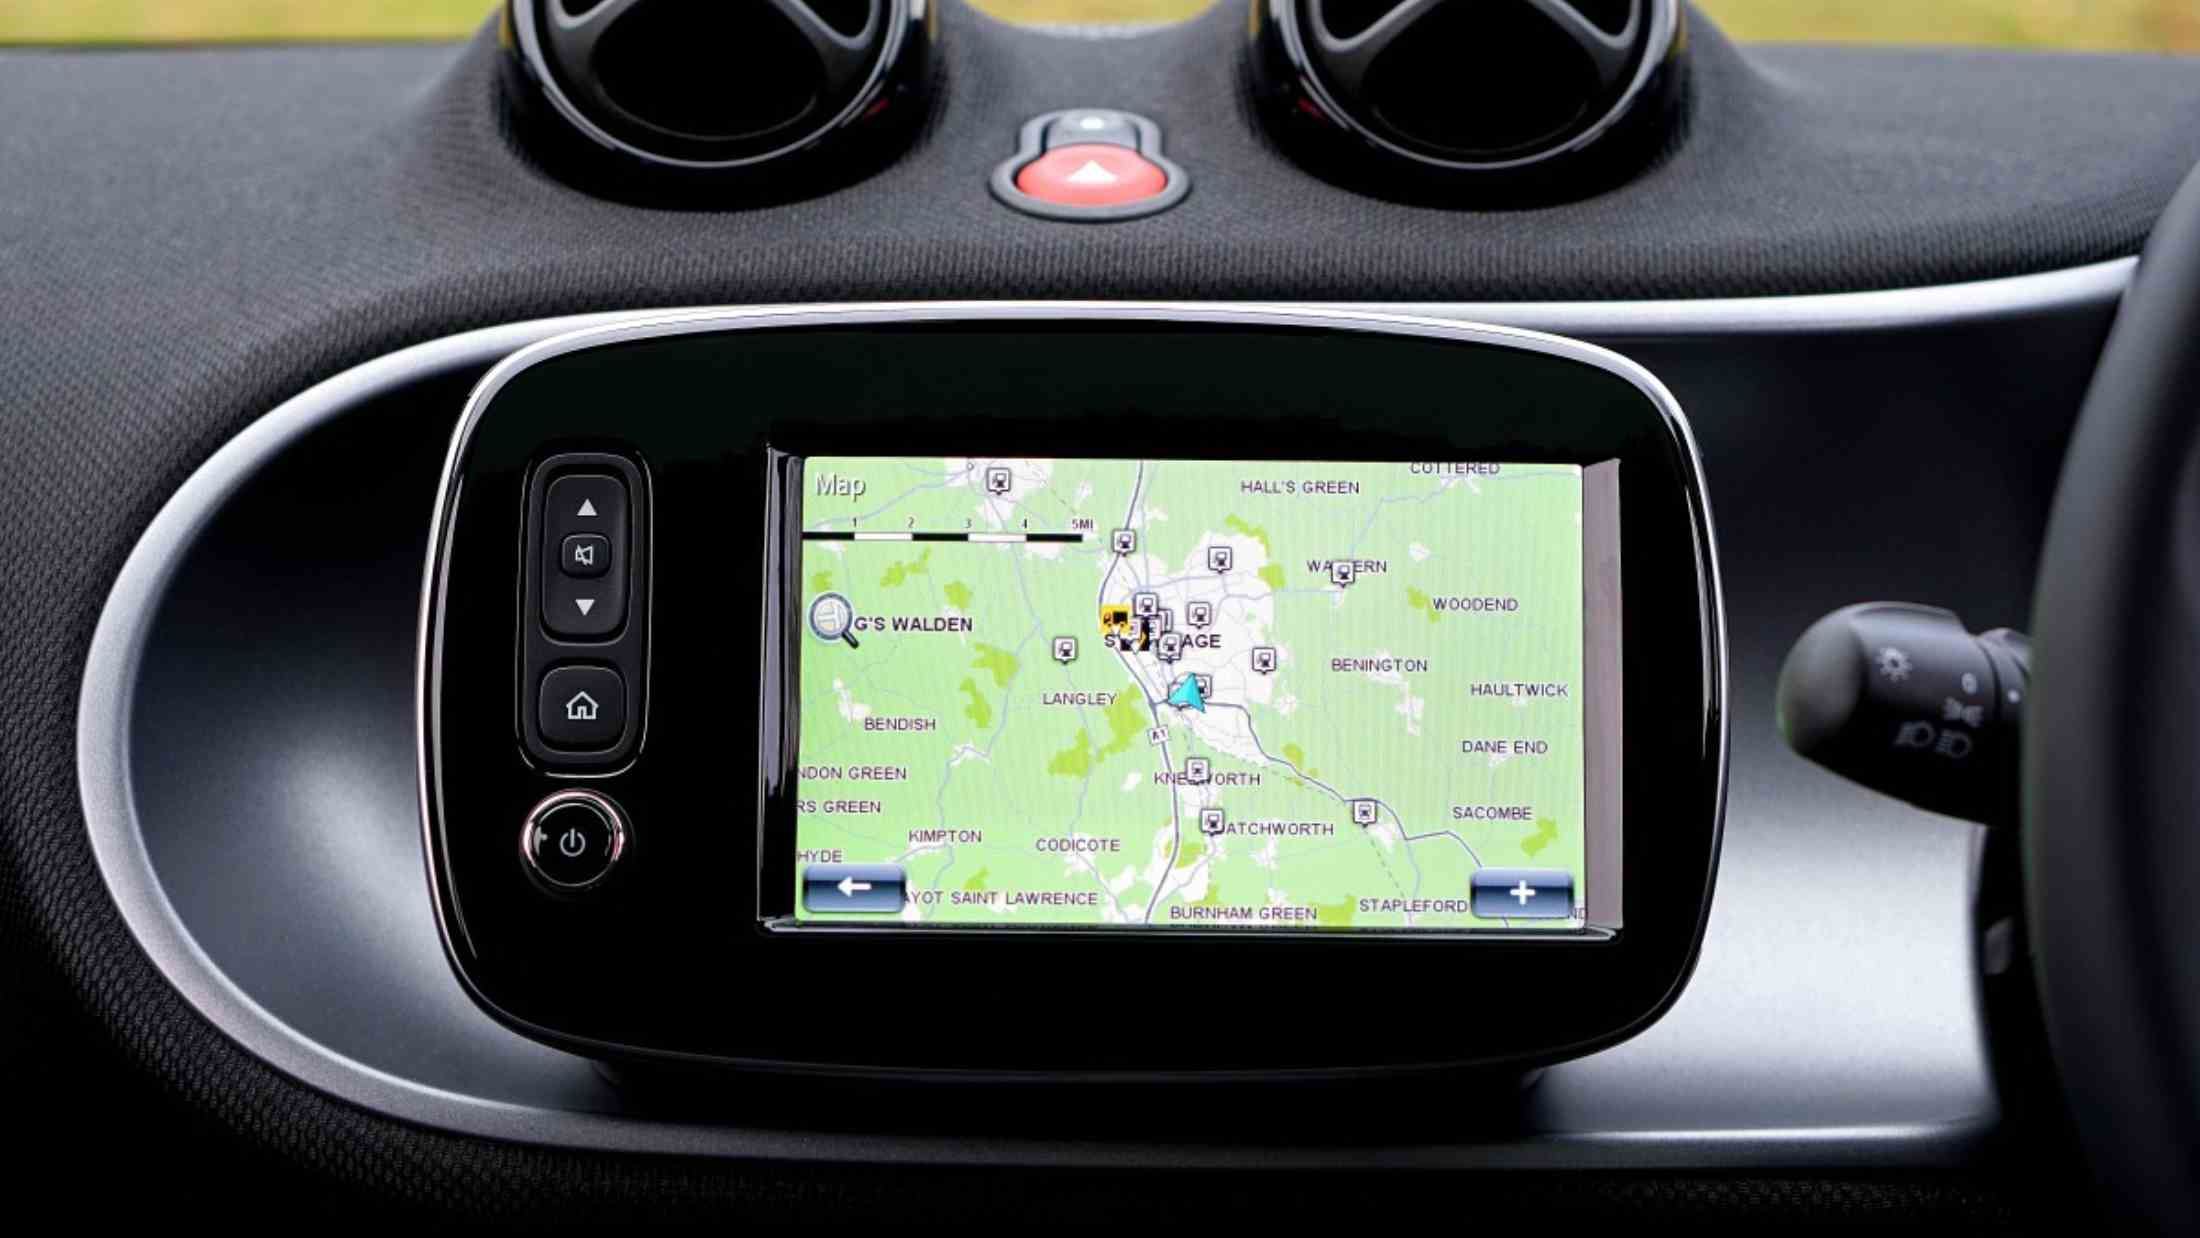 Sat Nav device fitted on car dasboard